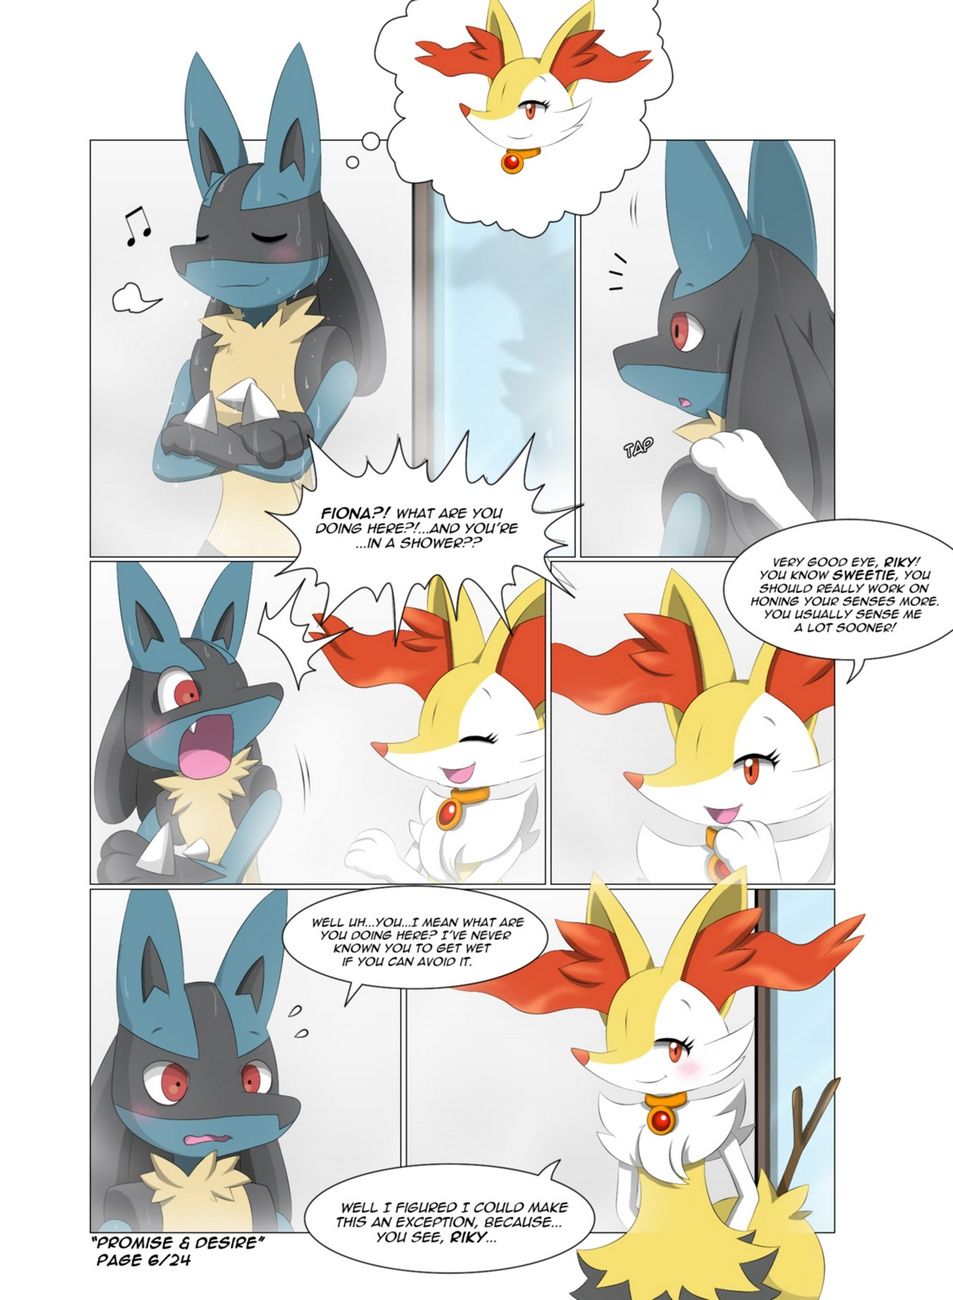 Promise & Desire page 7